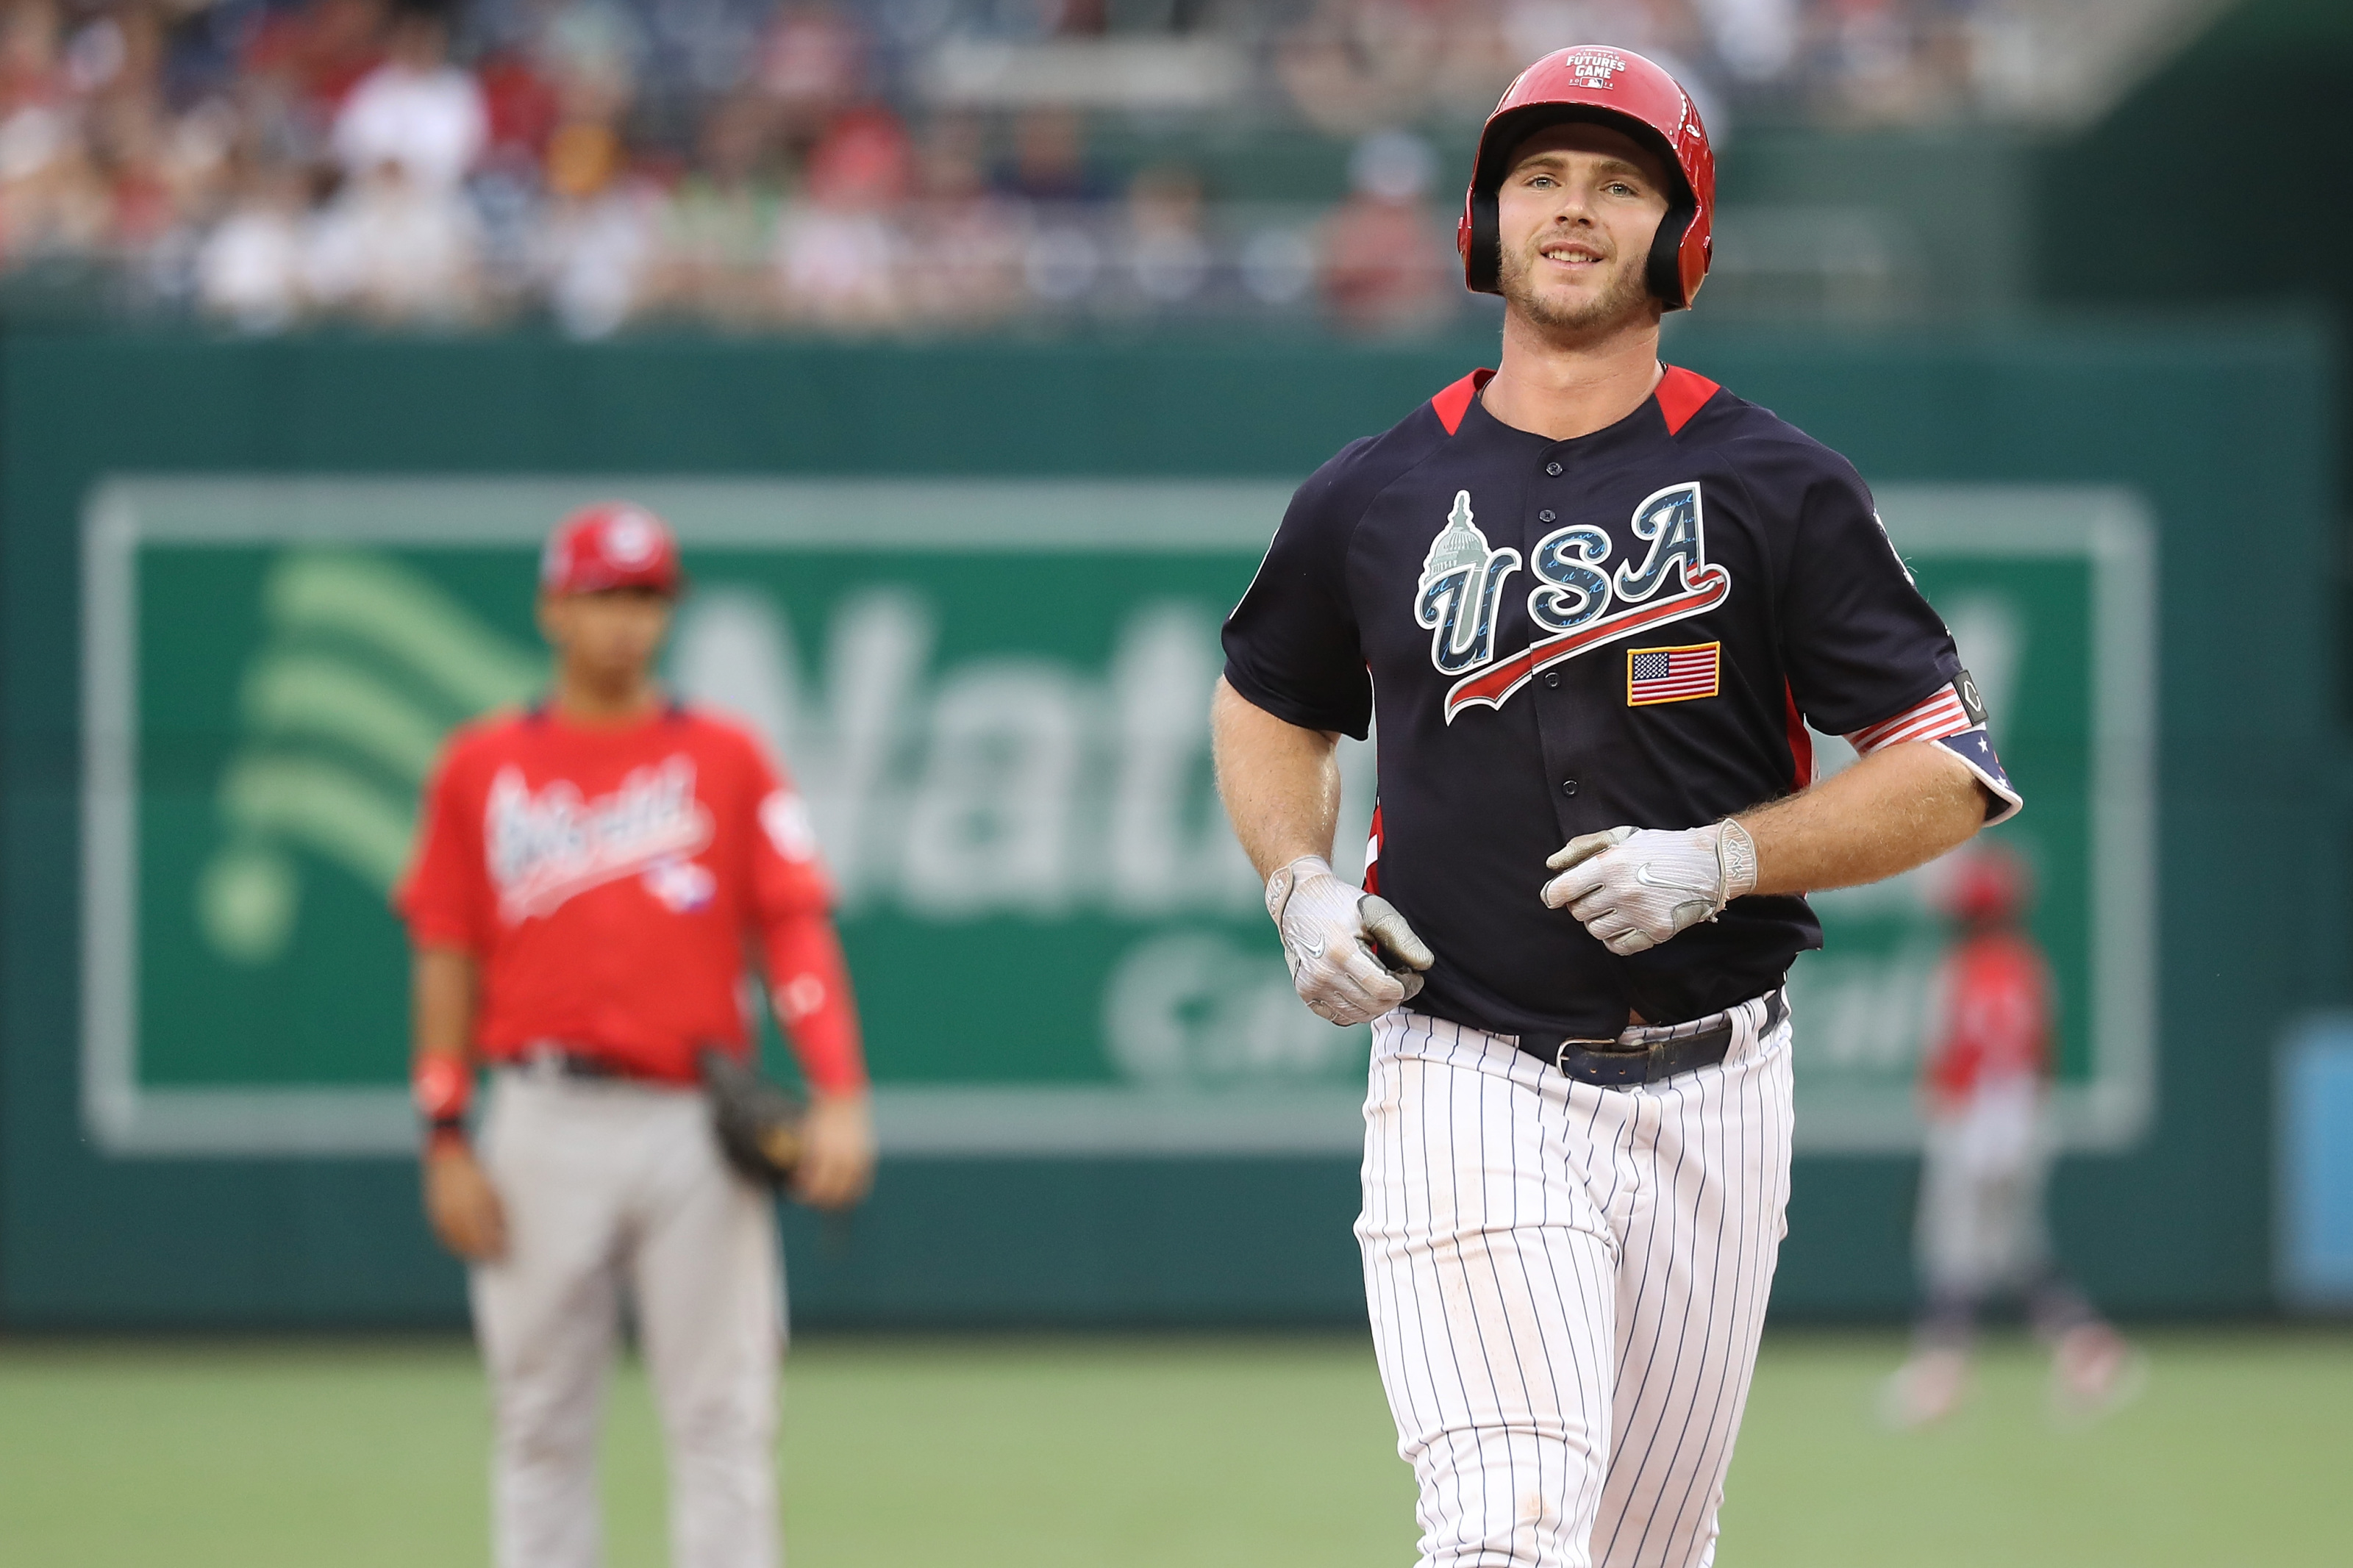 New York Mets: Peter Alonso may be a star in the making